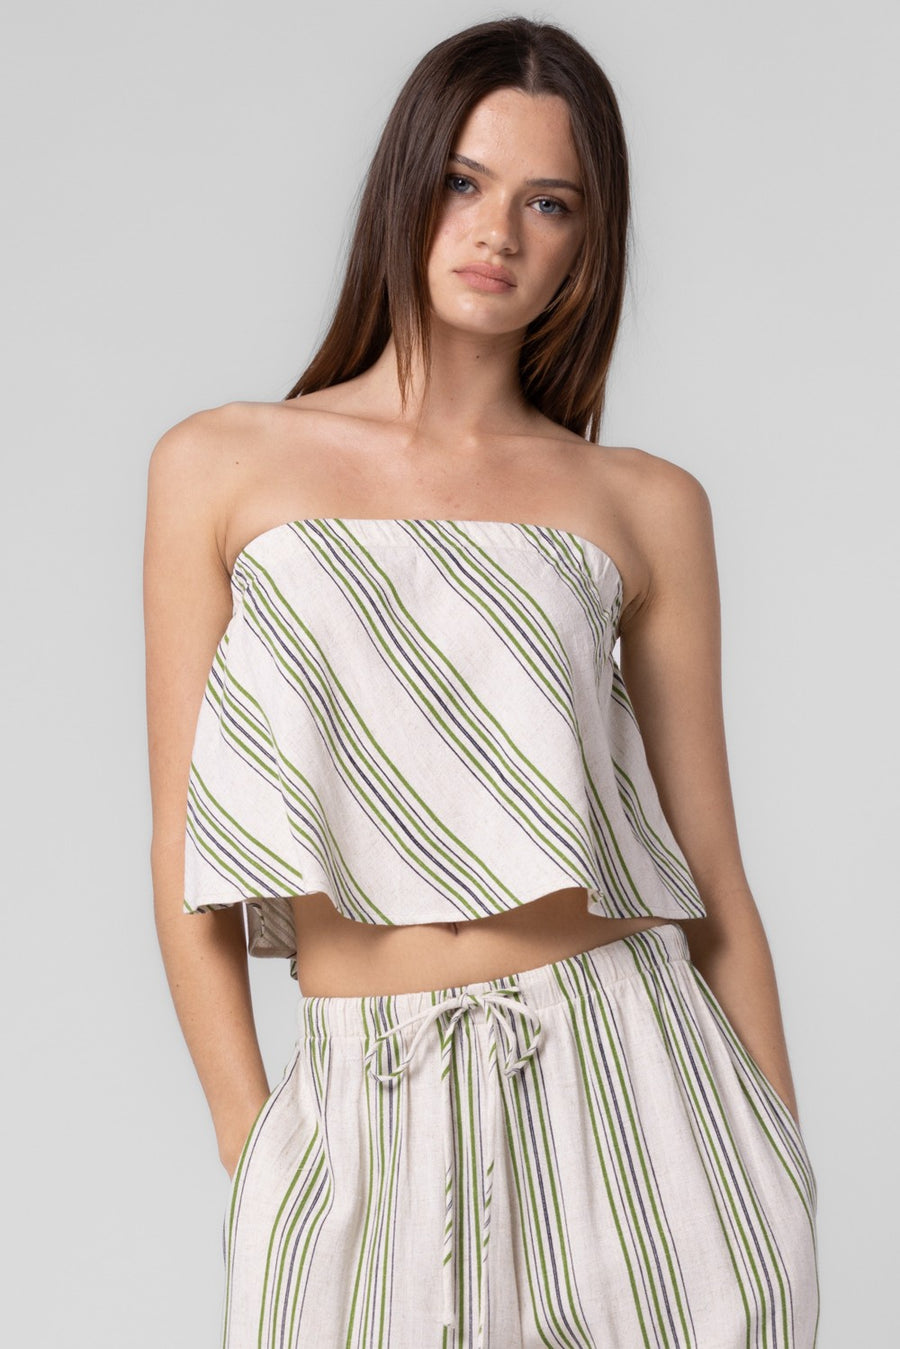 Pairs with the matching Wailyn Striped Pant

Featuring a flowy diagonally striped tube top in the colors green and ivory 